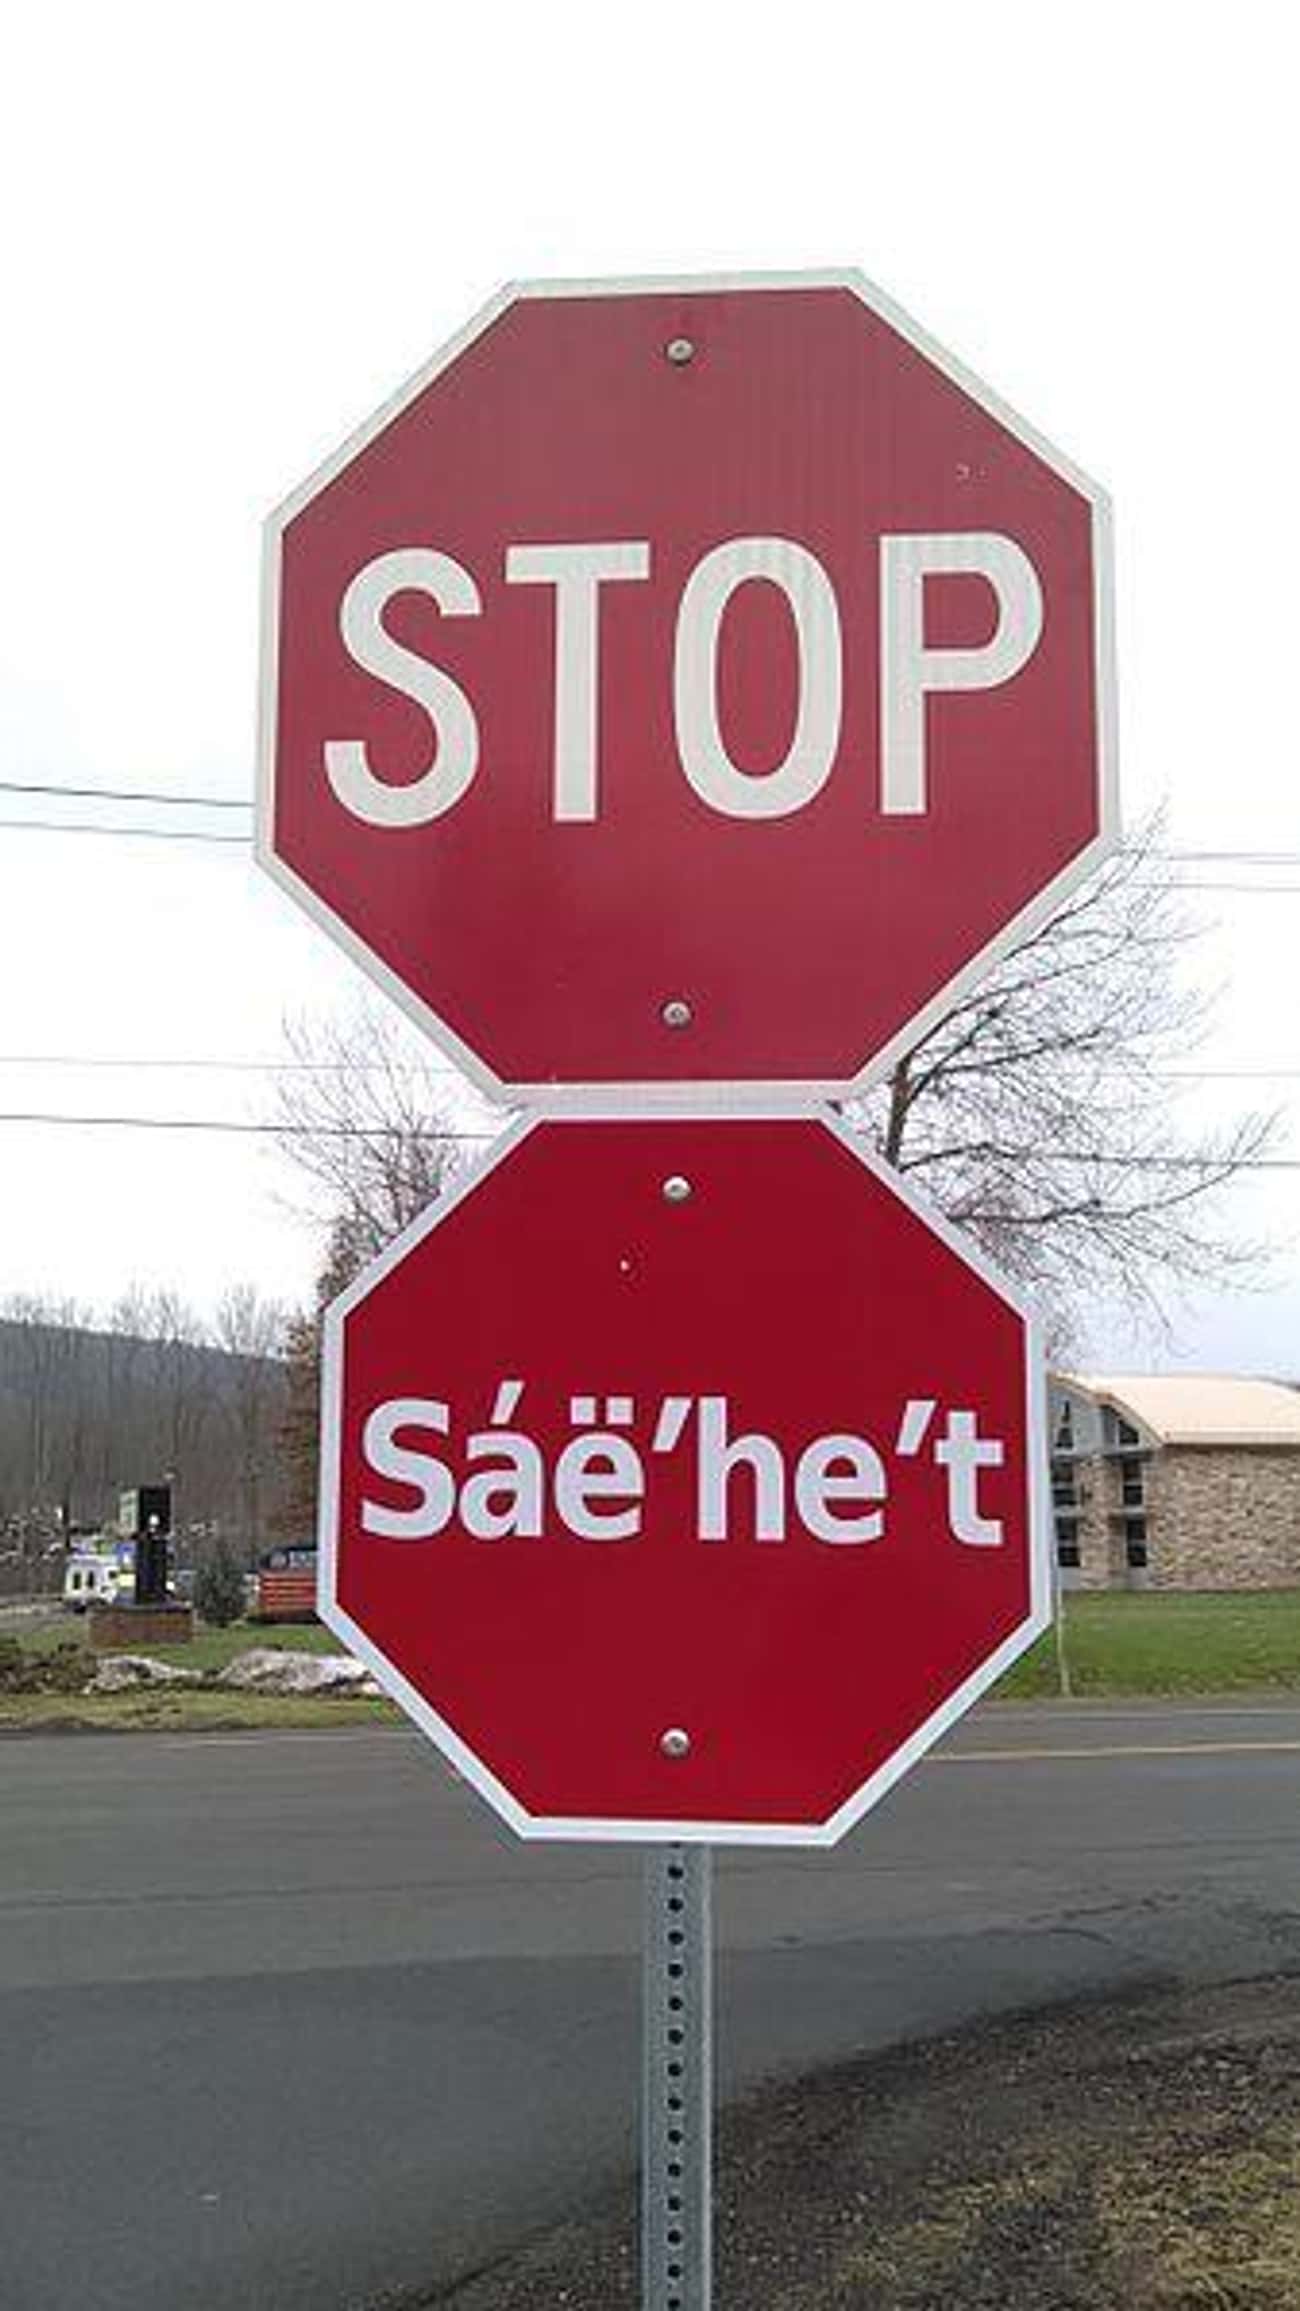 Why Are Stop Signs Octagonal?